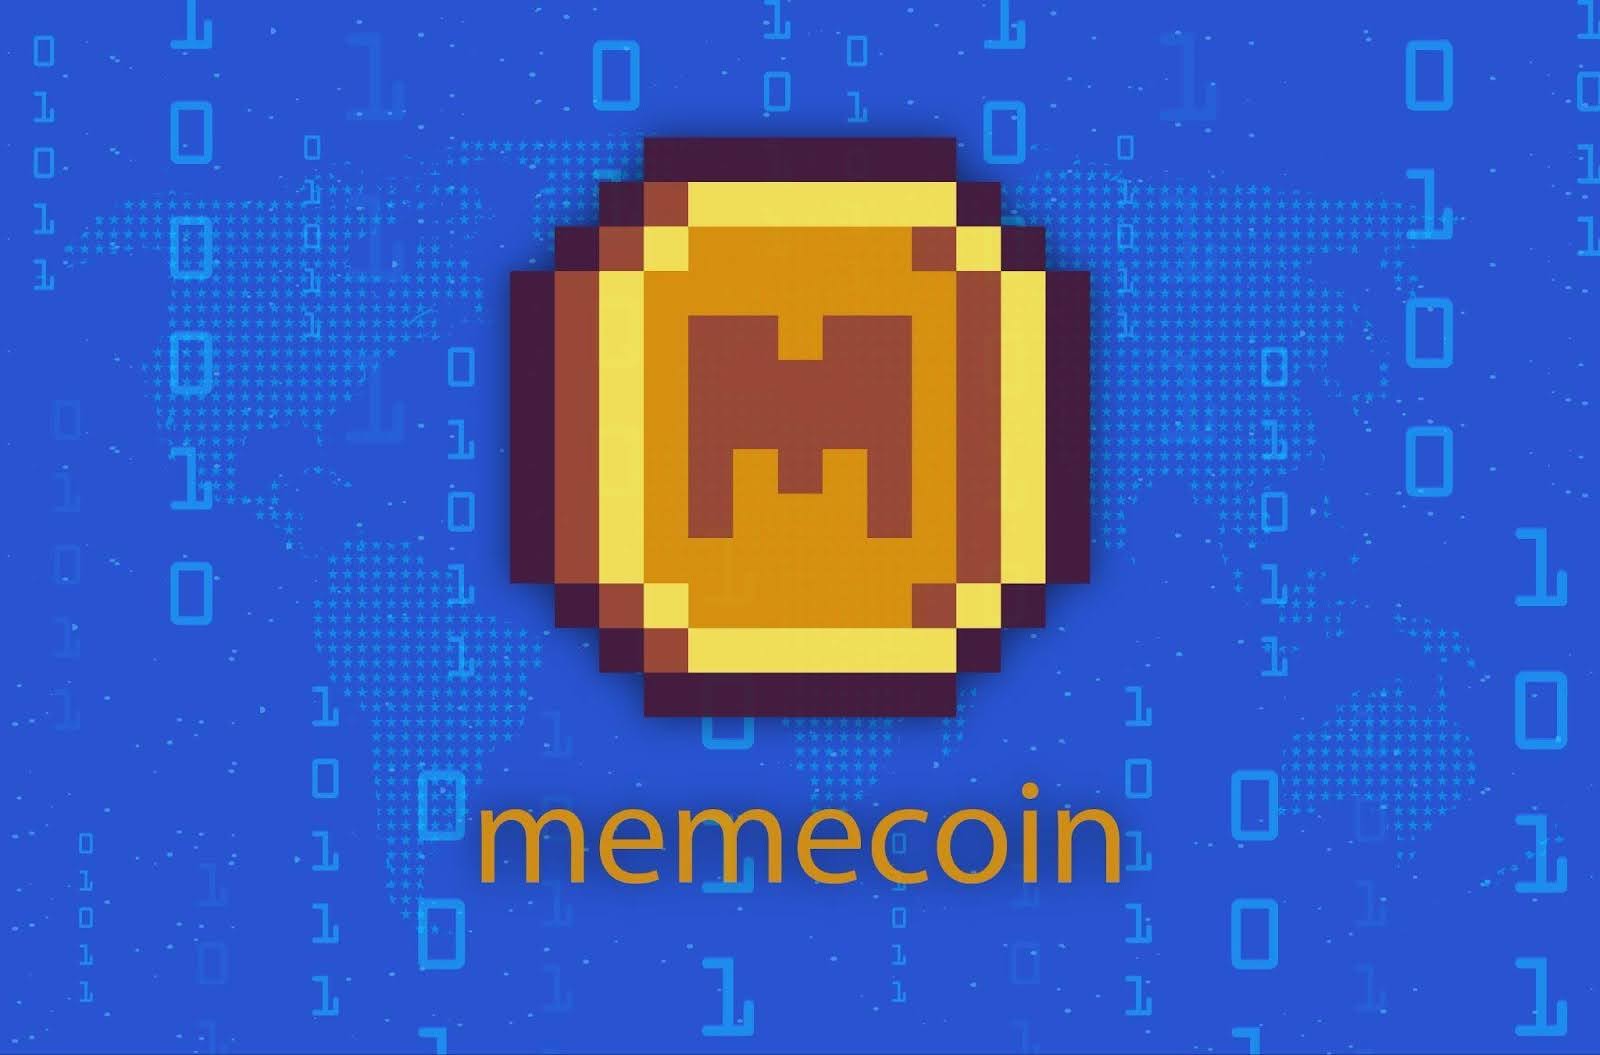 Telegram Founder Receives Donations In Notcoin Worth $7 Million, Rising Appeal For New Memecoin